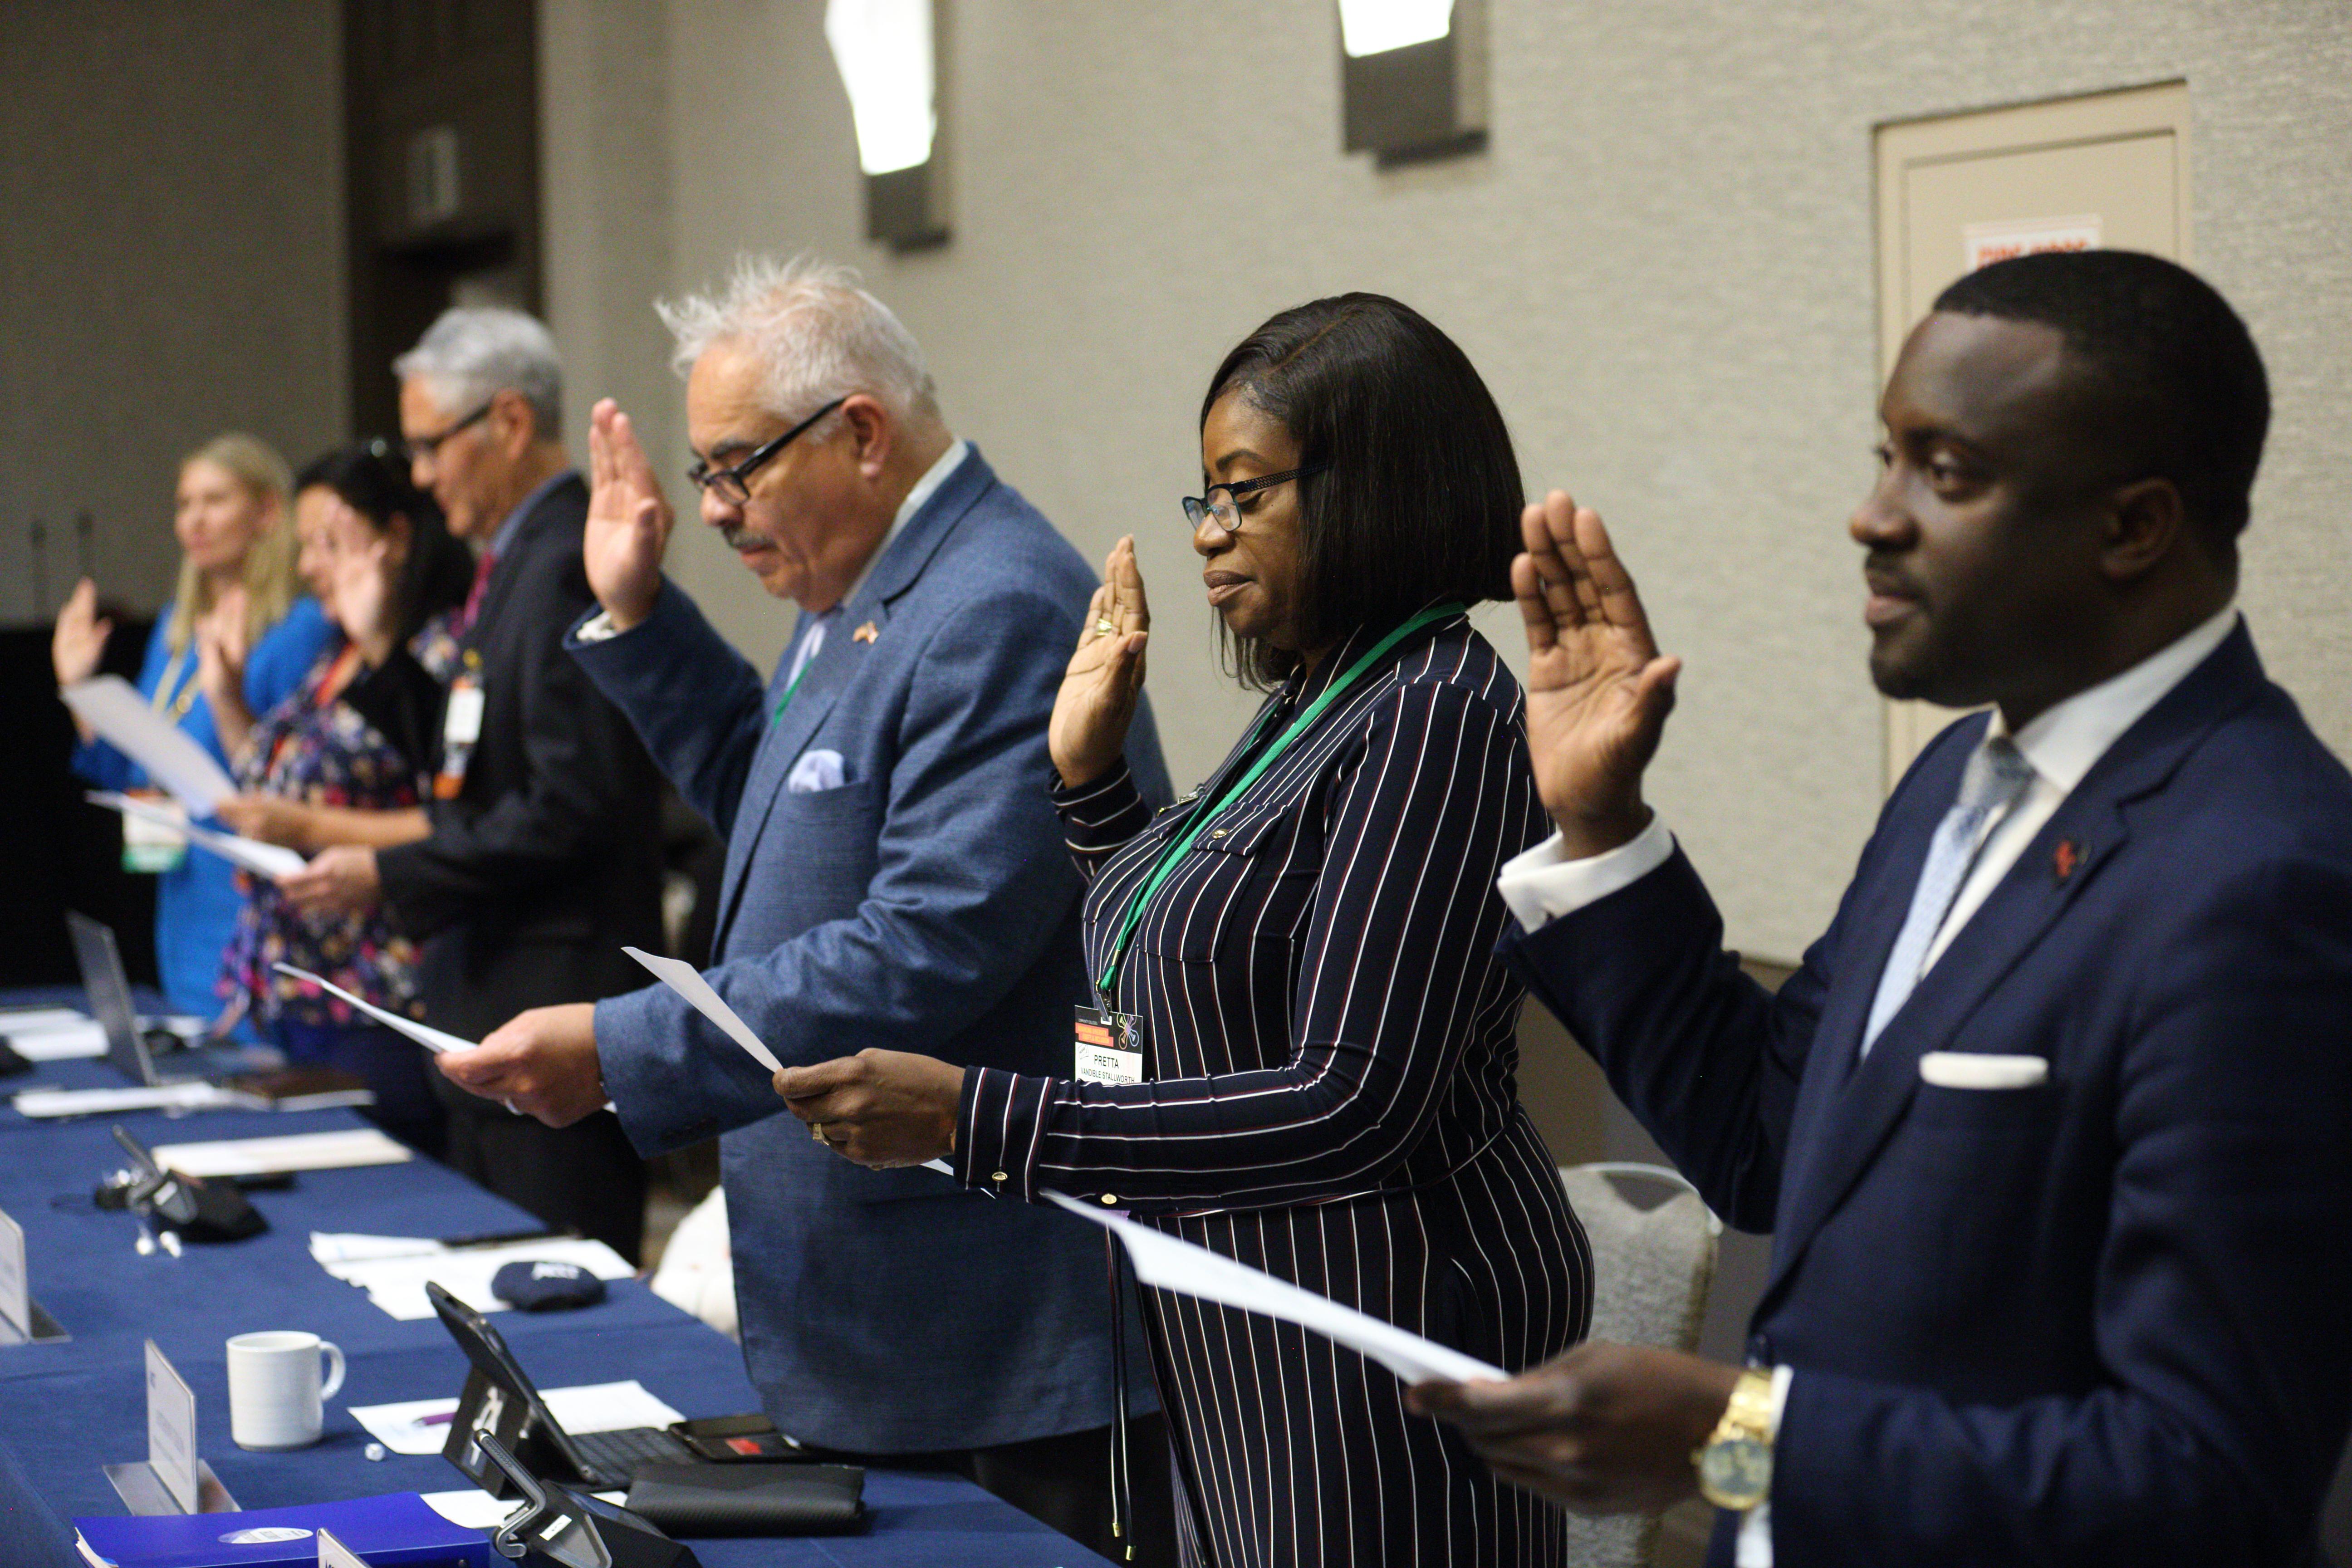 Community college trustees take oath of office.